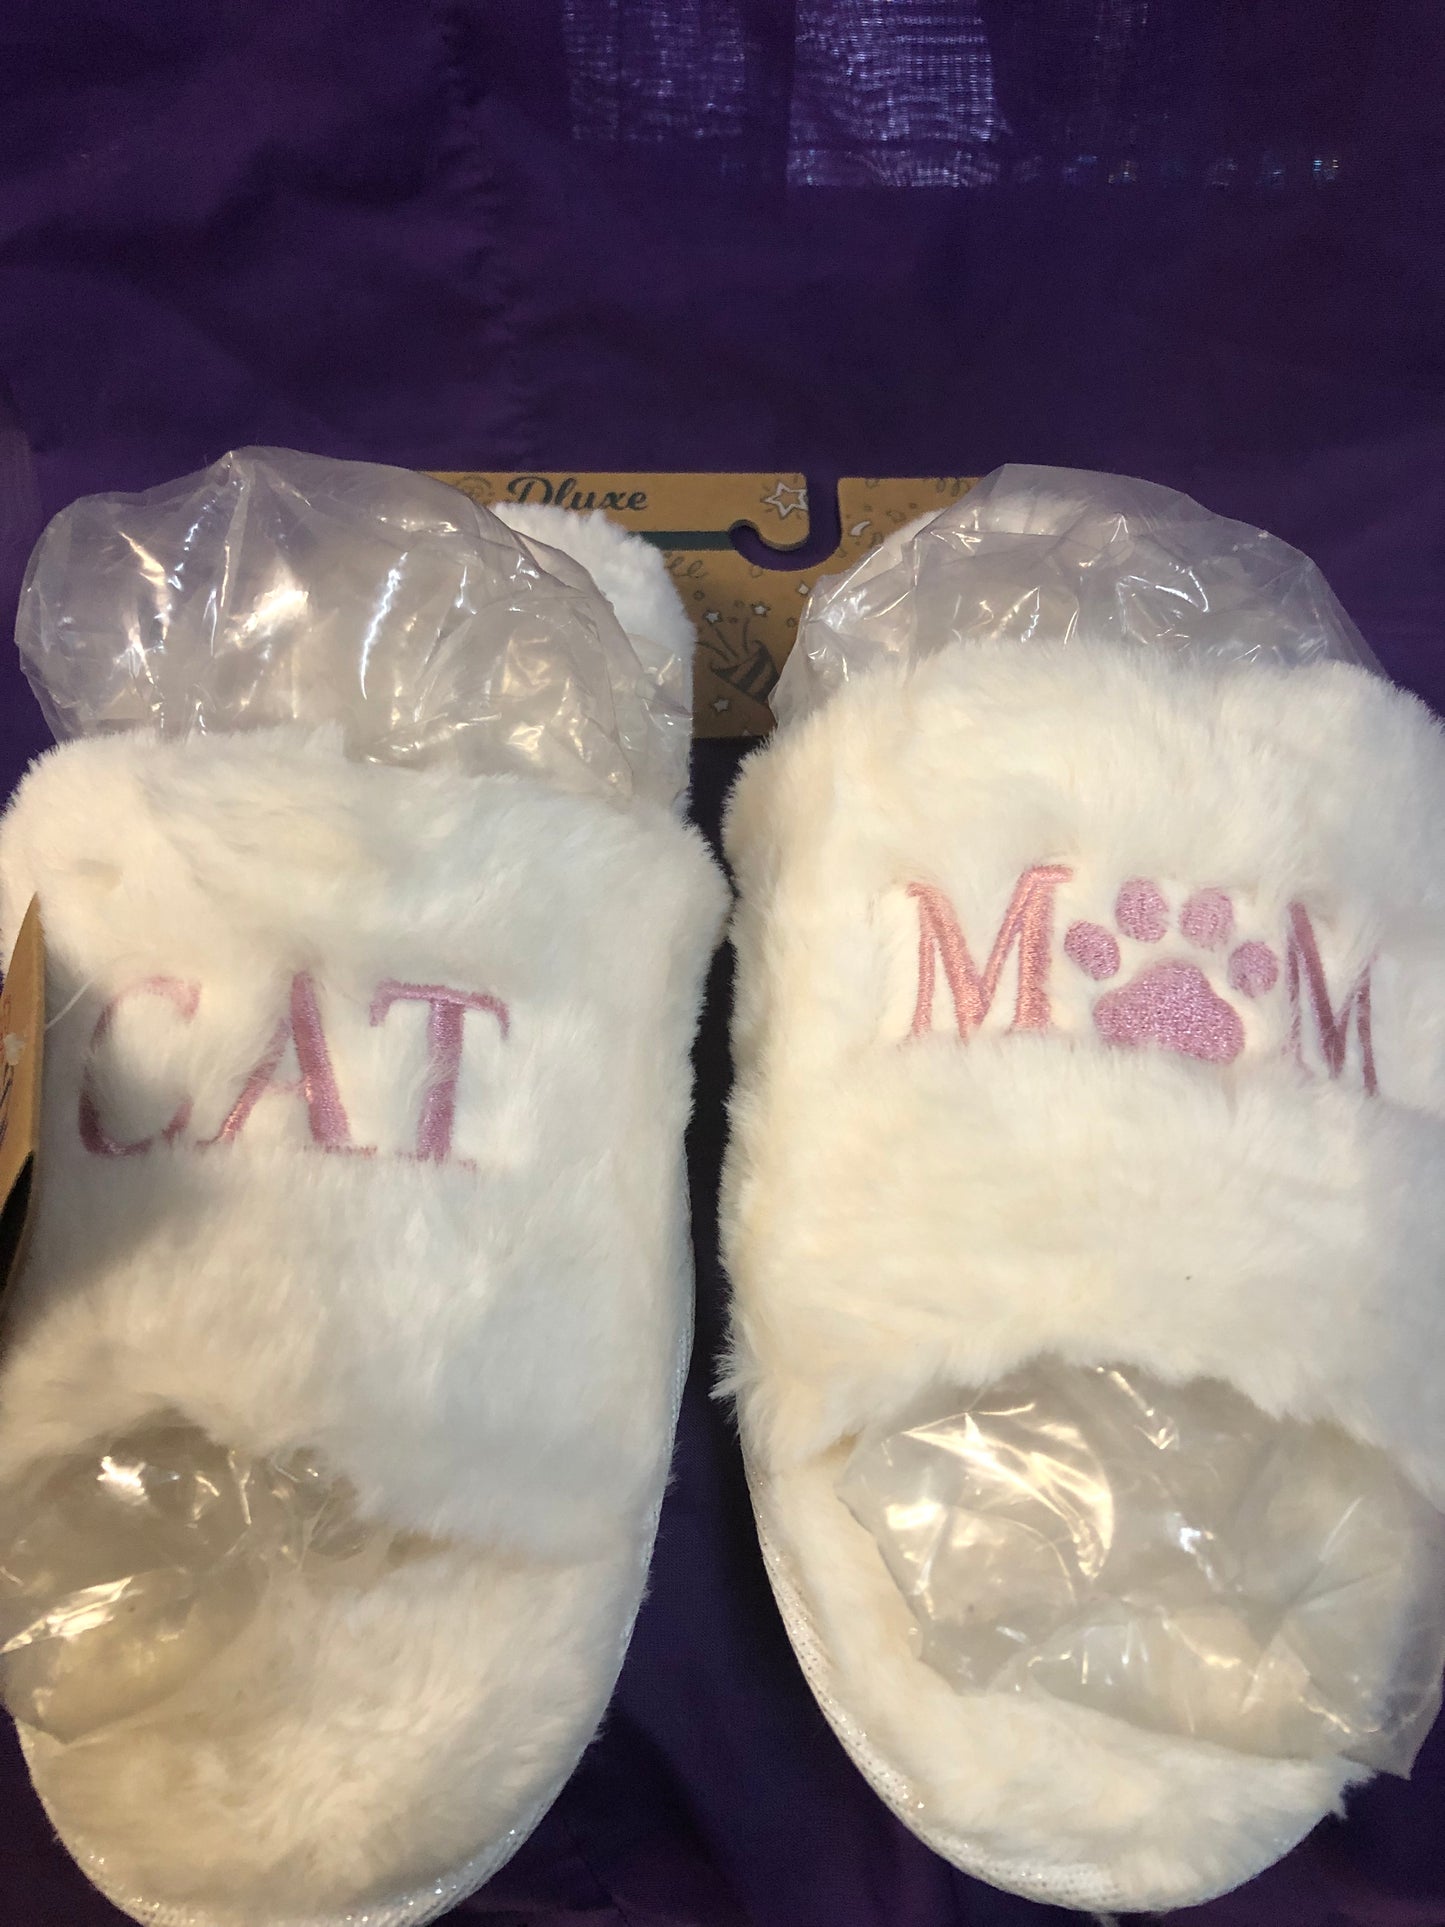 Woman Bed Slippers(Great For The Cat Lover) Color Off White Size L (9-10)"New Christmas "SOLD OUT Arrival"